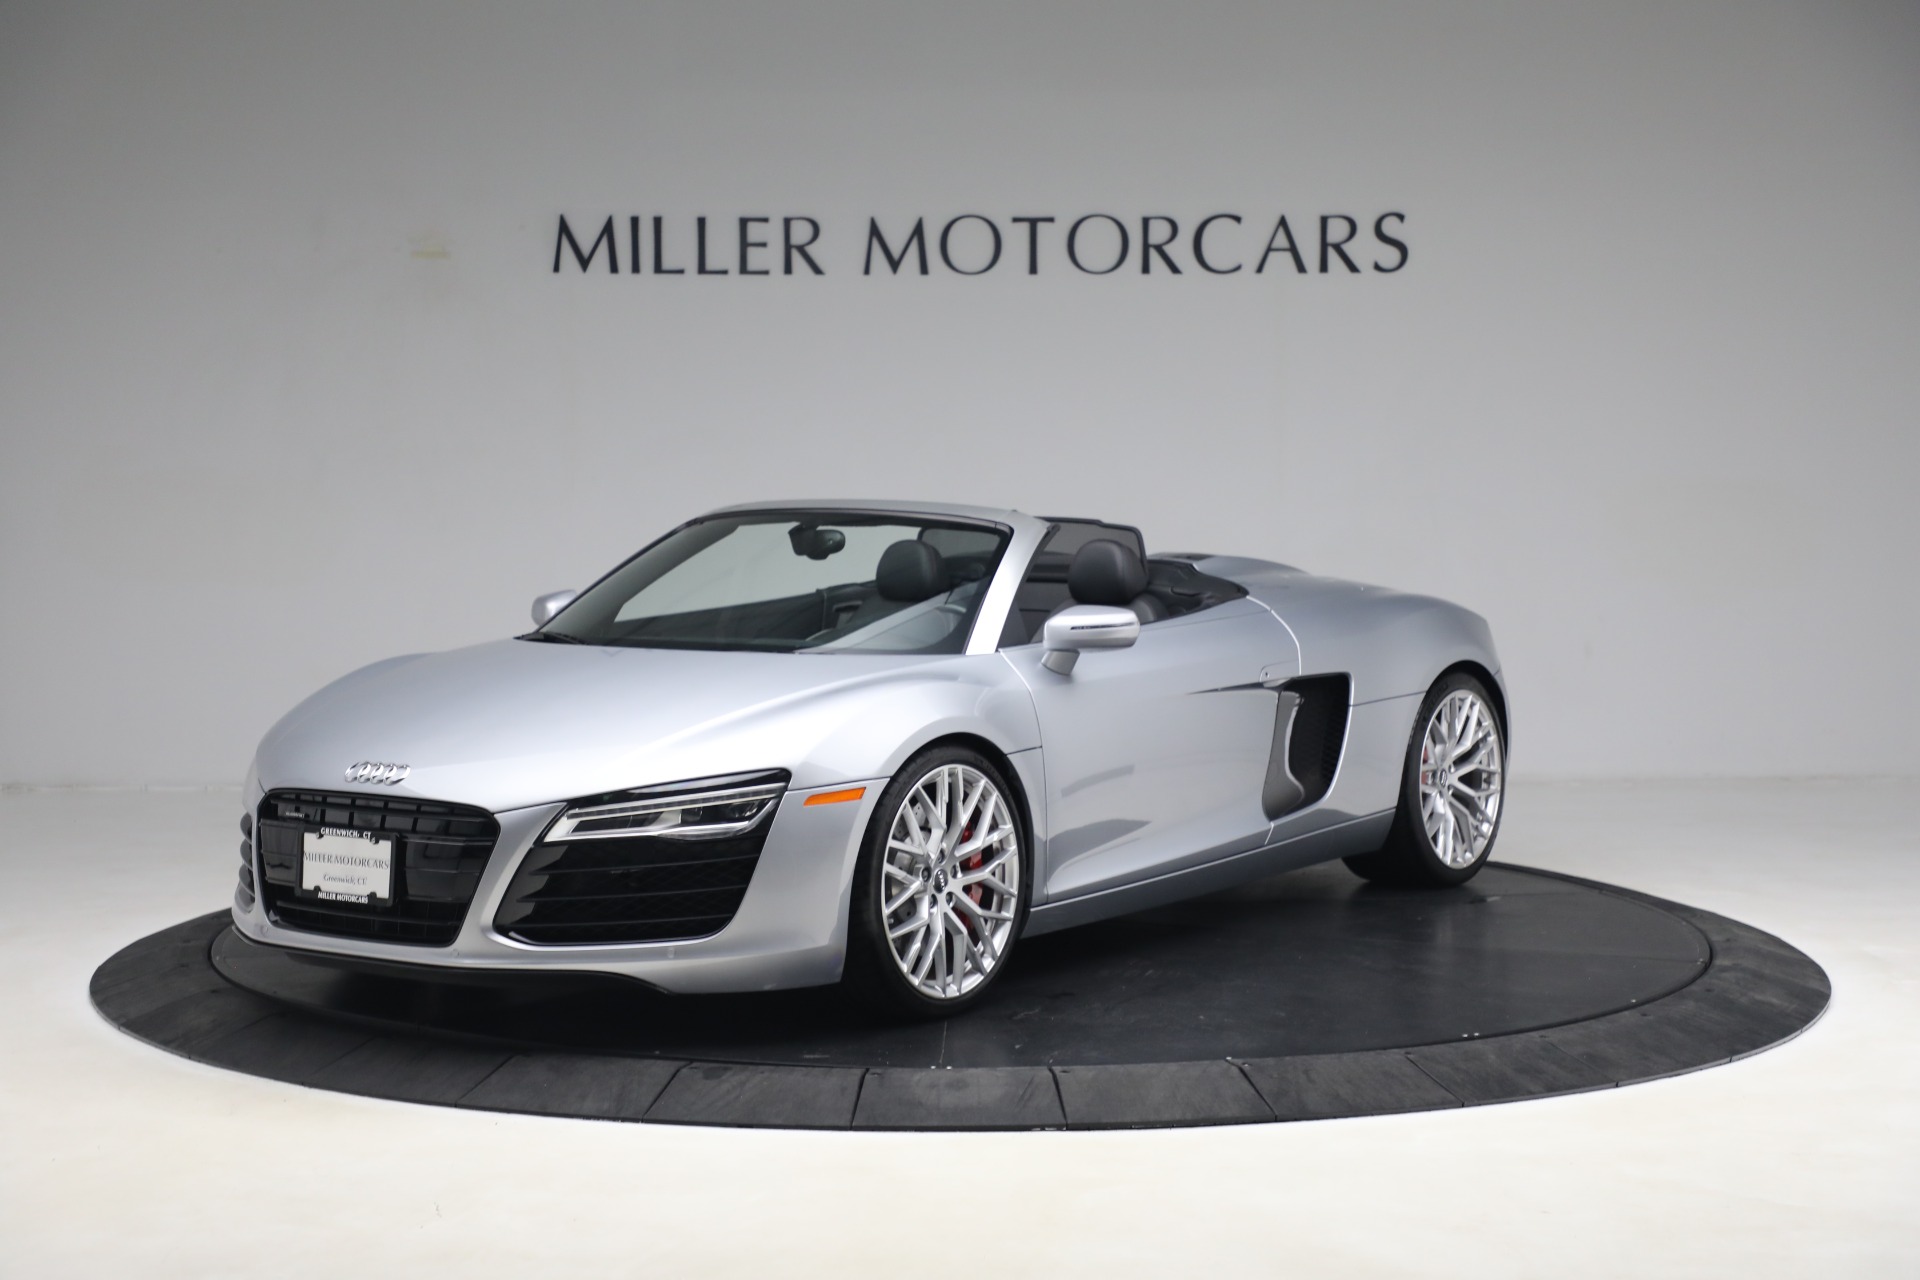 Used 2015 Audi R8 4.2 quattro Spyder for sale $149,900 at Rolls-Royce Motor Cars Greenwich in Greenwich CT 06830 1